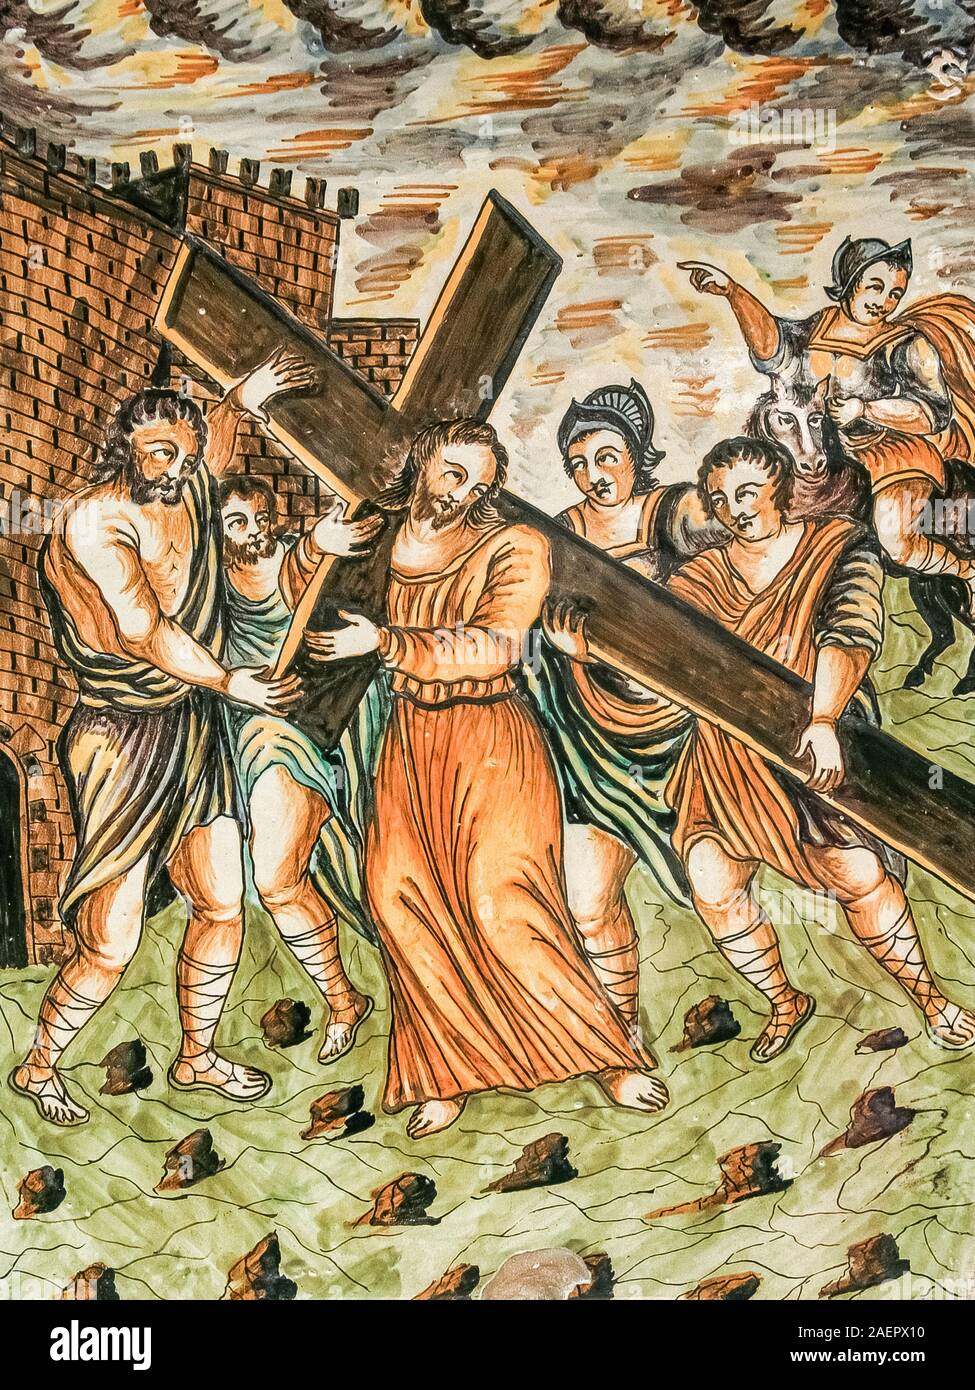 Italy Emilia Romagna Faenza: International Museum of Ceramics: , Seconda Stazione, Via Crucis second STATION Jesus is charged with the cross Stock Photo